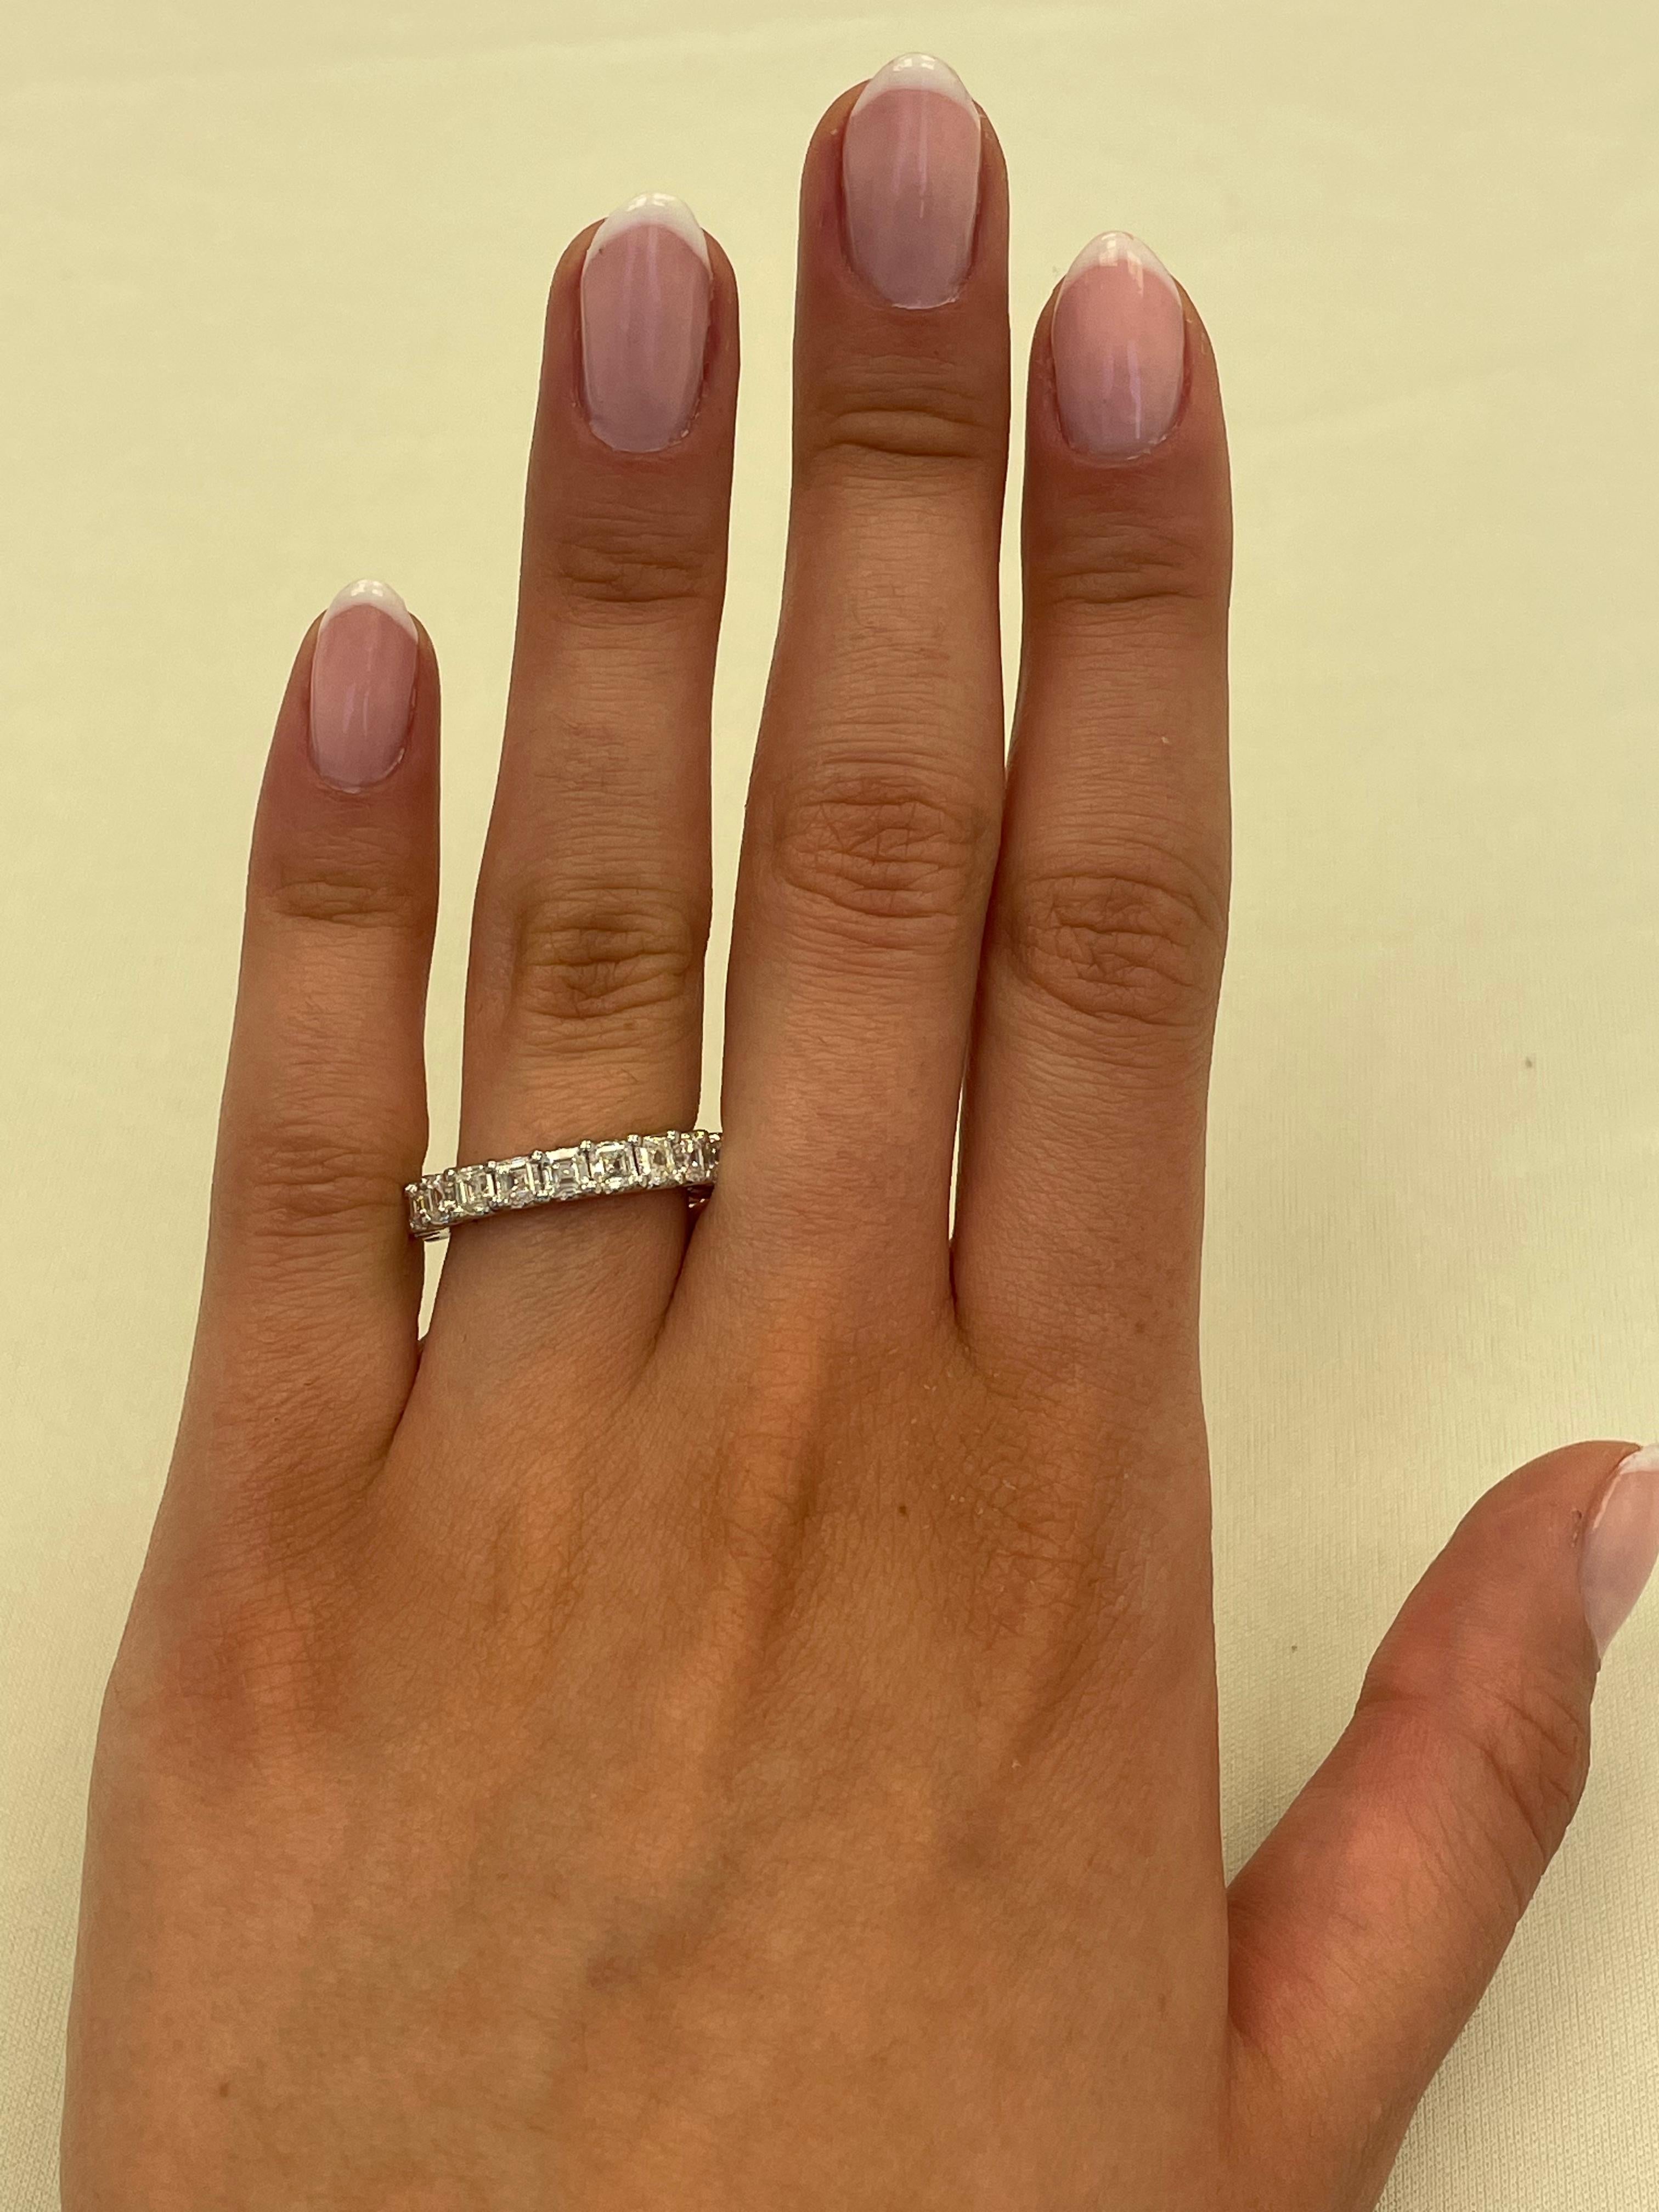 Stunning asscher cut diamond eternity band, By Alexander Beverly Hills.
21 asscher cut diamonds, 3.25 carats. D/E color and VVS clarity. Platinum gold, 6.01 grams, size 5.5. 
Accommodated with an up-to-date appraisal by a GIA G.G. once purchased,